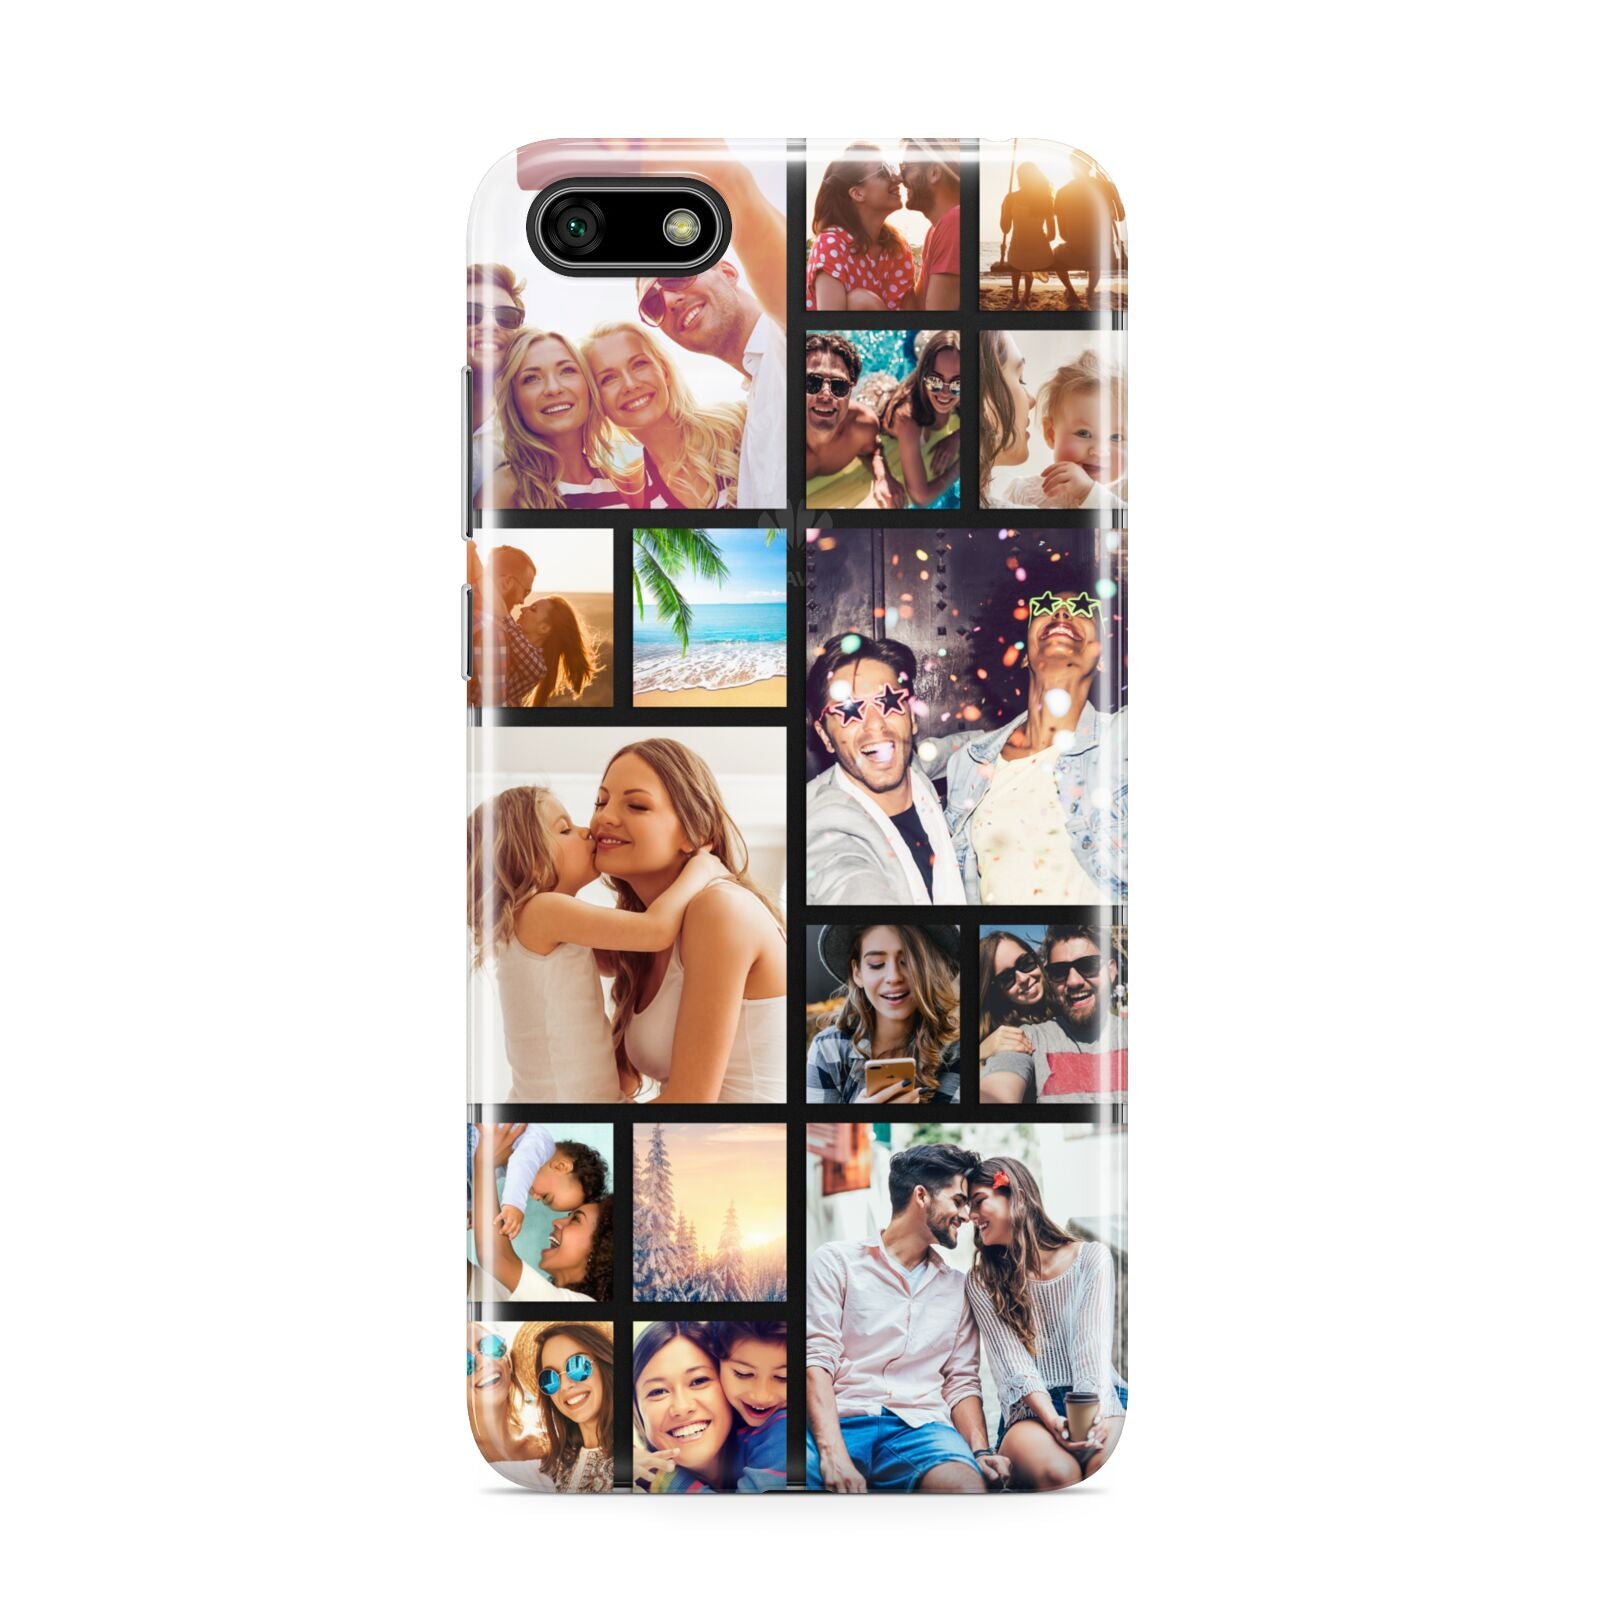 Abstract Multi Tile Photo Montage Upload Huawei Y5 Prime 2018 Phone Case